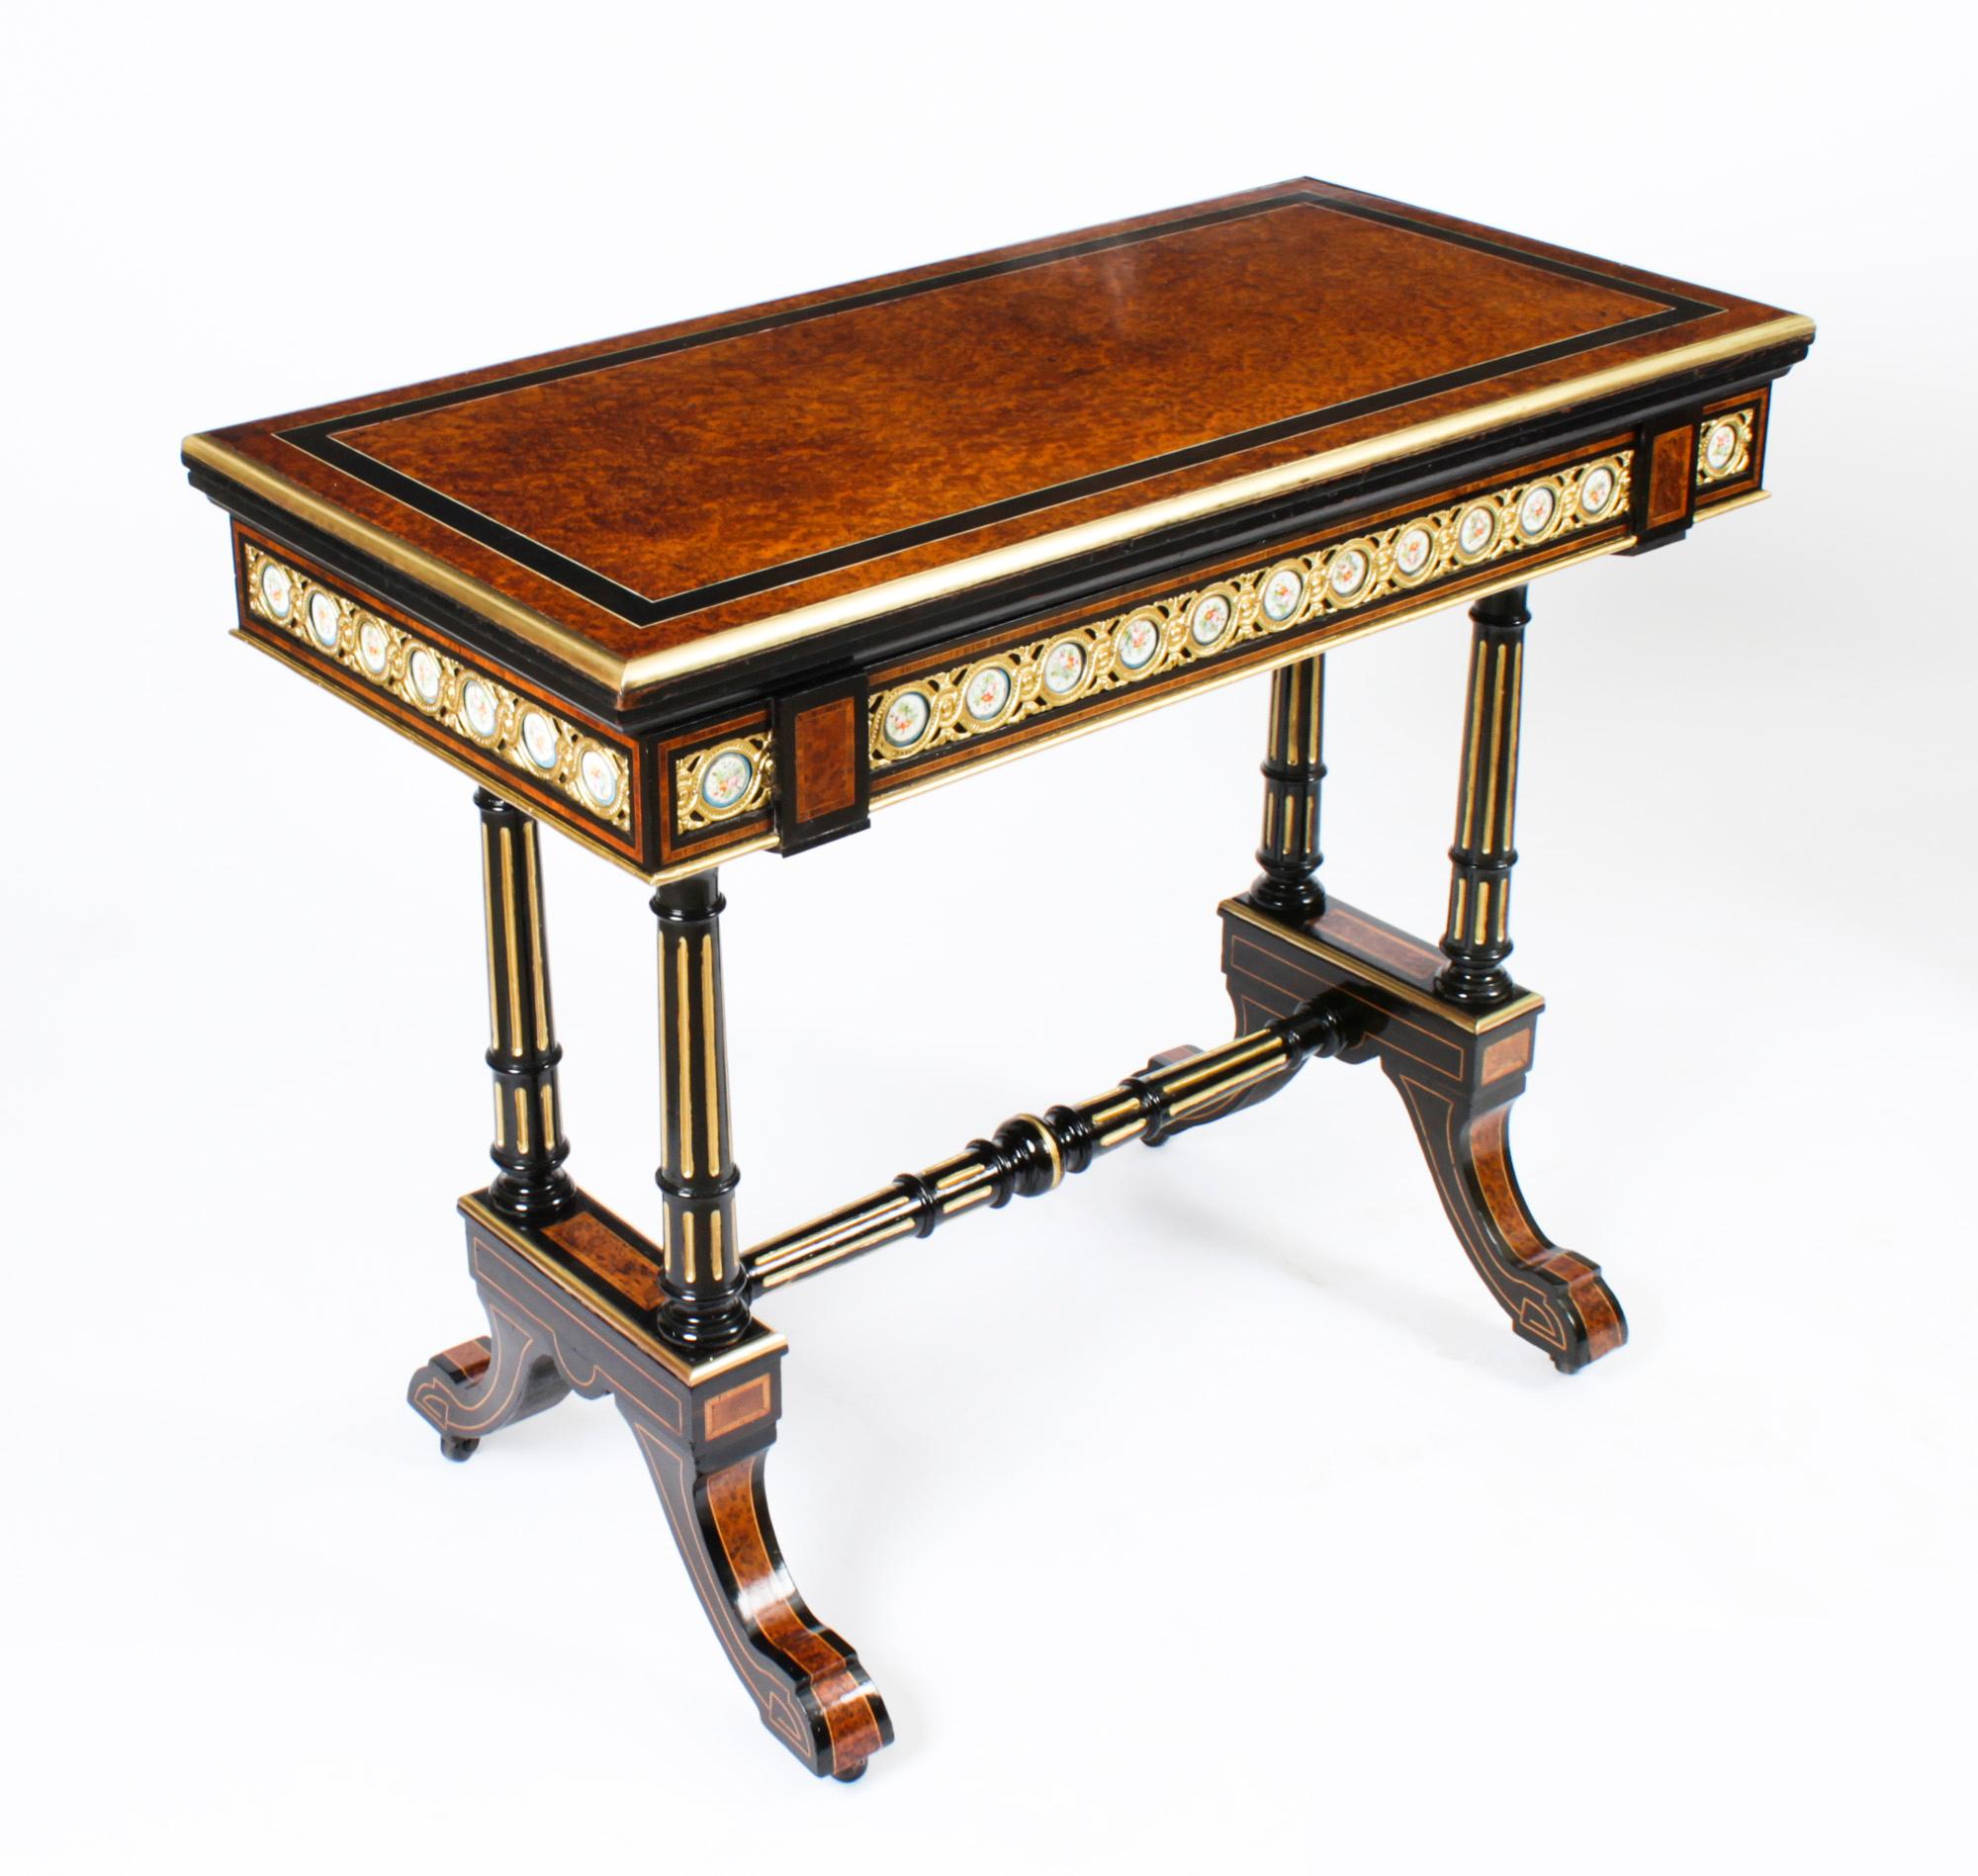 This is a stunning pair of antique French amboyna and ebonised card tables, circa 1860 in date.
 
The tables are made from striking and rare amboyna, and then each is beautifully decorated with forty fabulous Sevres porcelain plaques which feature